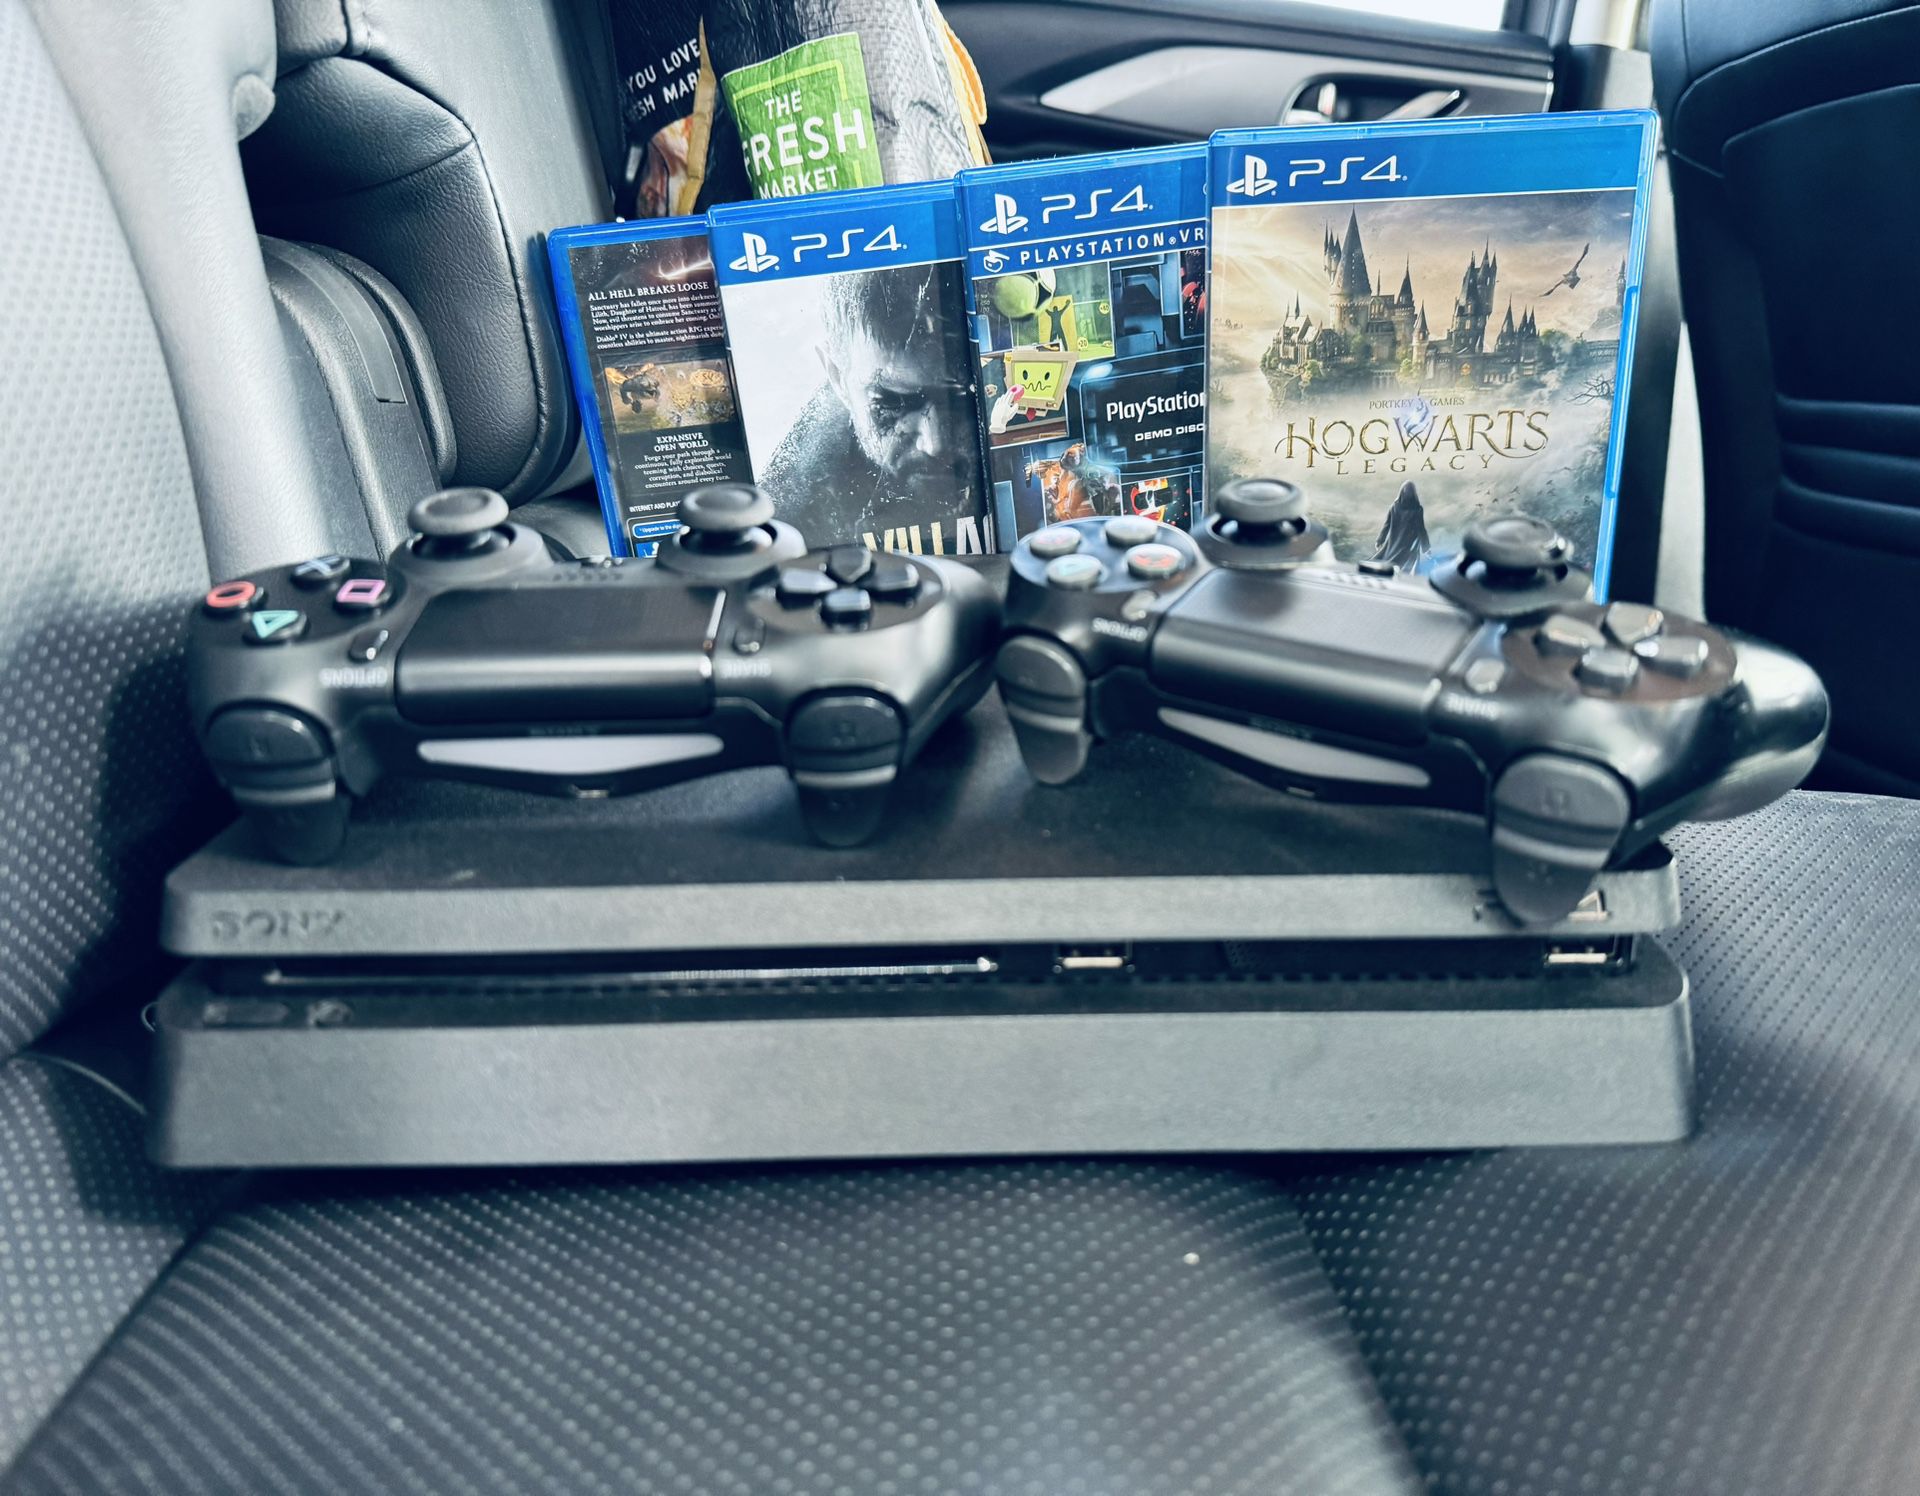 Ps4 1tb paquete completo 2 controllers + 4 juegos + 6 meses garantia + los cables play 4 price firm